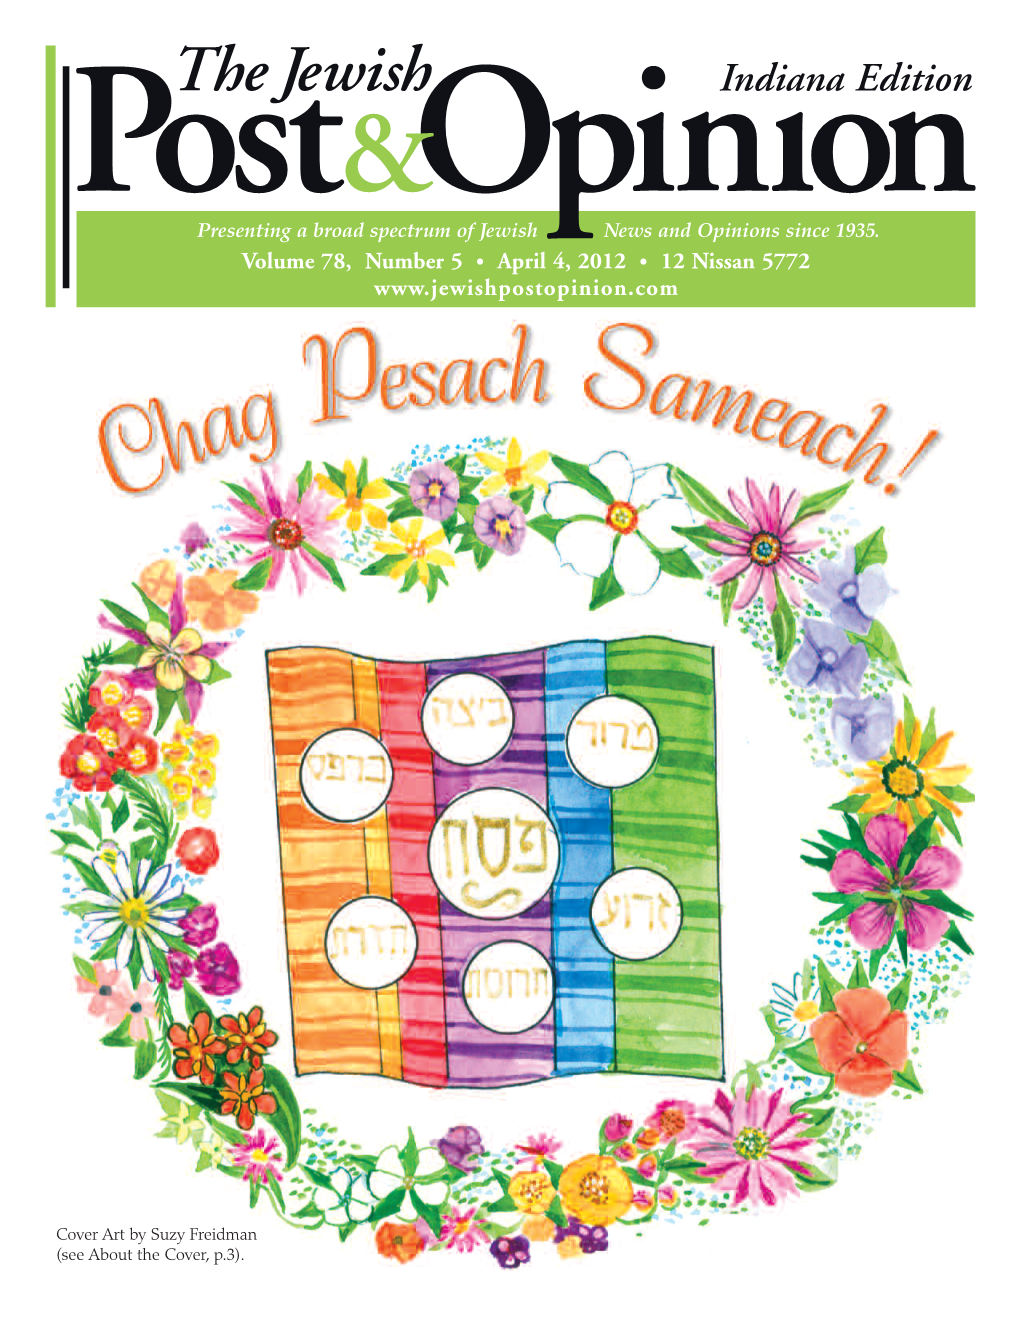 The Jewish Indiana Edition Post &Opinion Presenting a Broad Spectrum of Jewish News and Opinions Since 1935